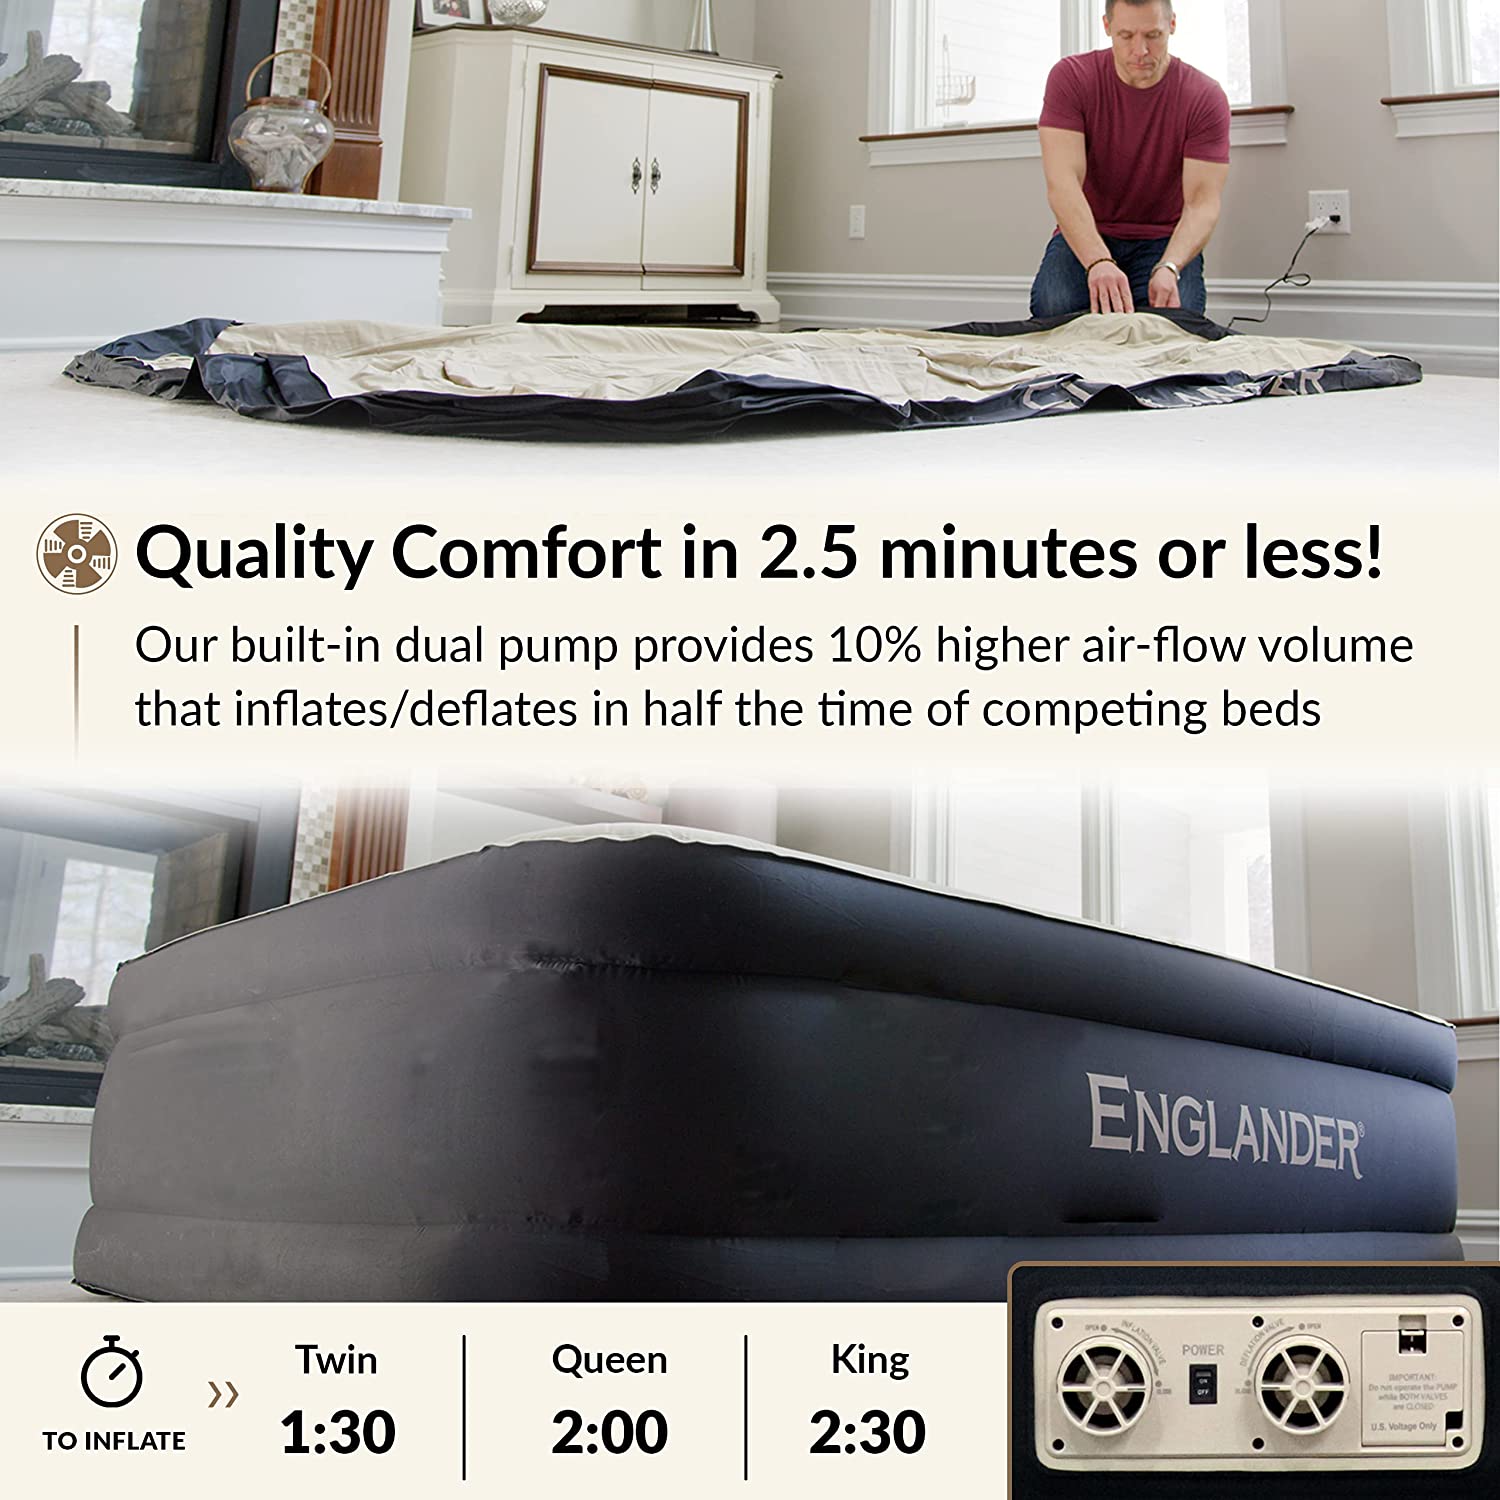 According to Englander, their air mattresses can inflate and deflate in half the time of other leading brands, making them super convenient and easy to use.